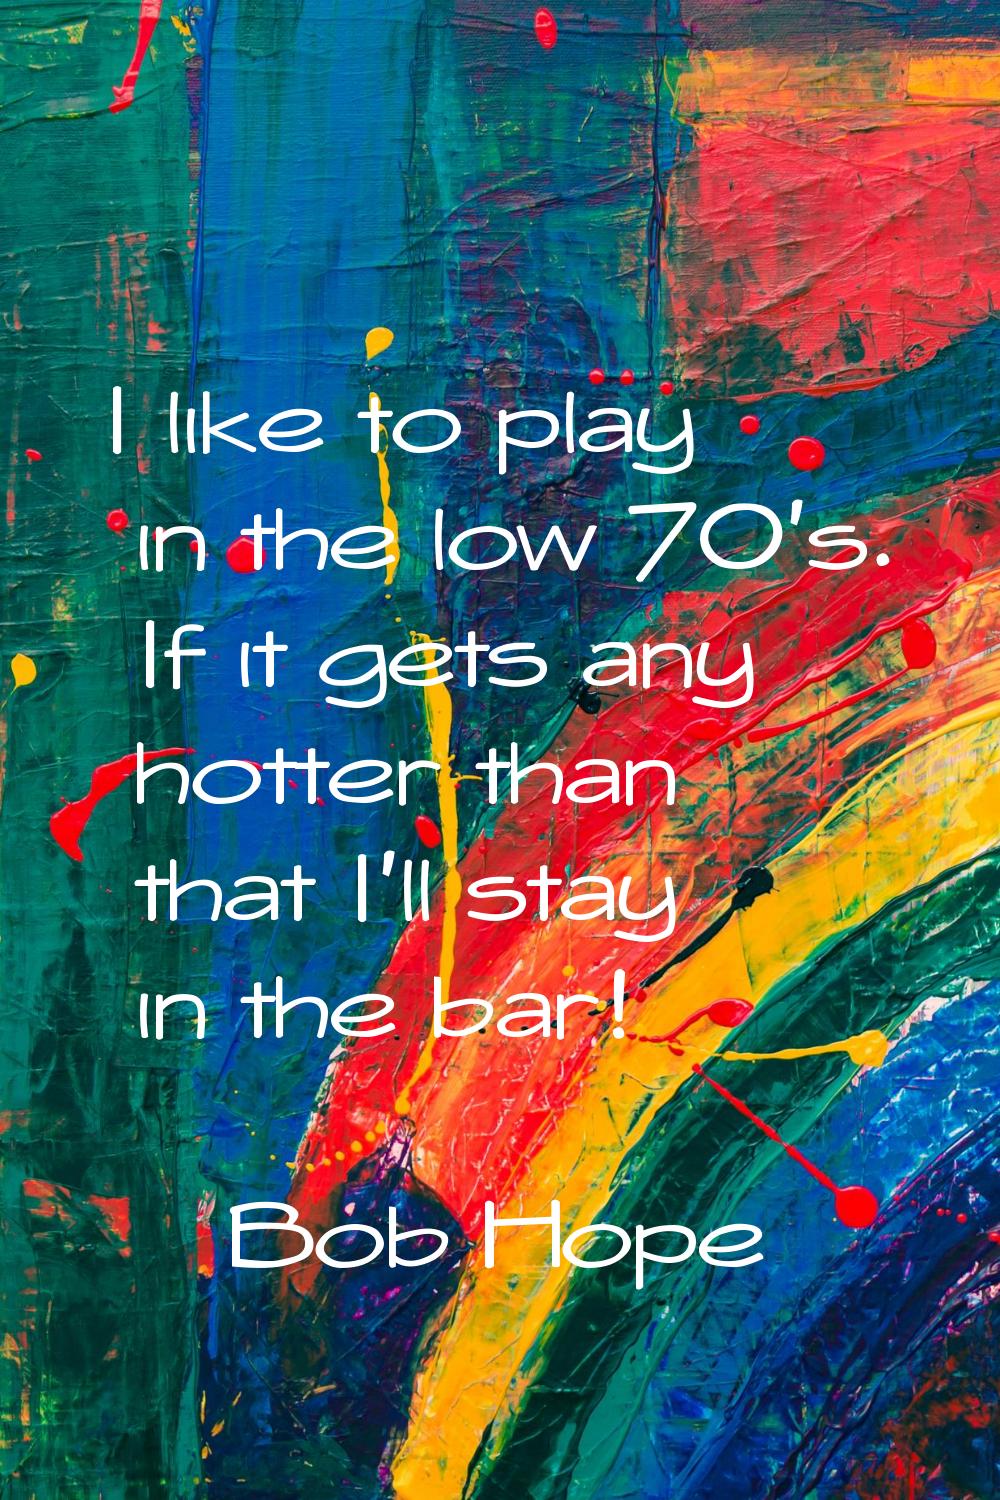 I like to play in the low 70's. If it gets any hotter than that I'll stay in the bar!